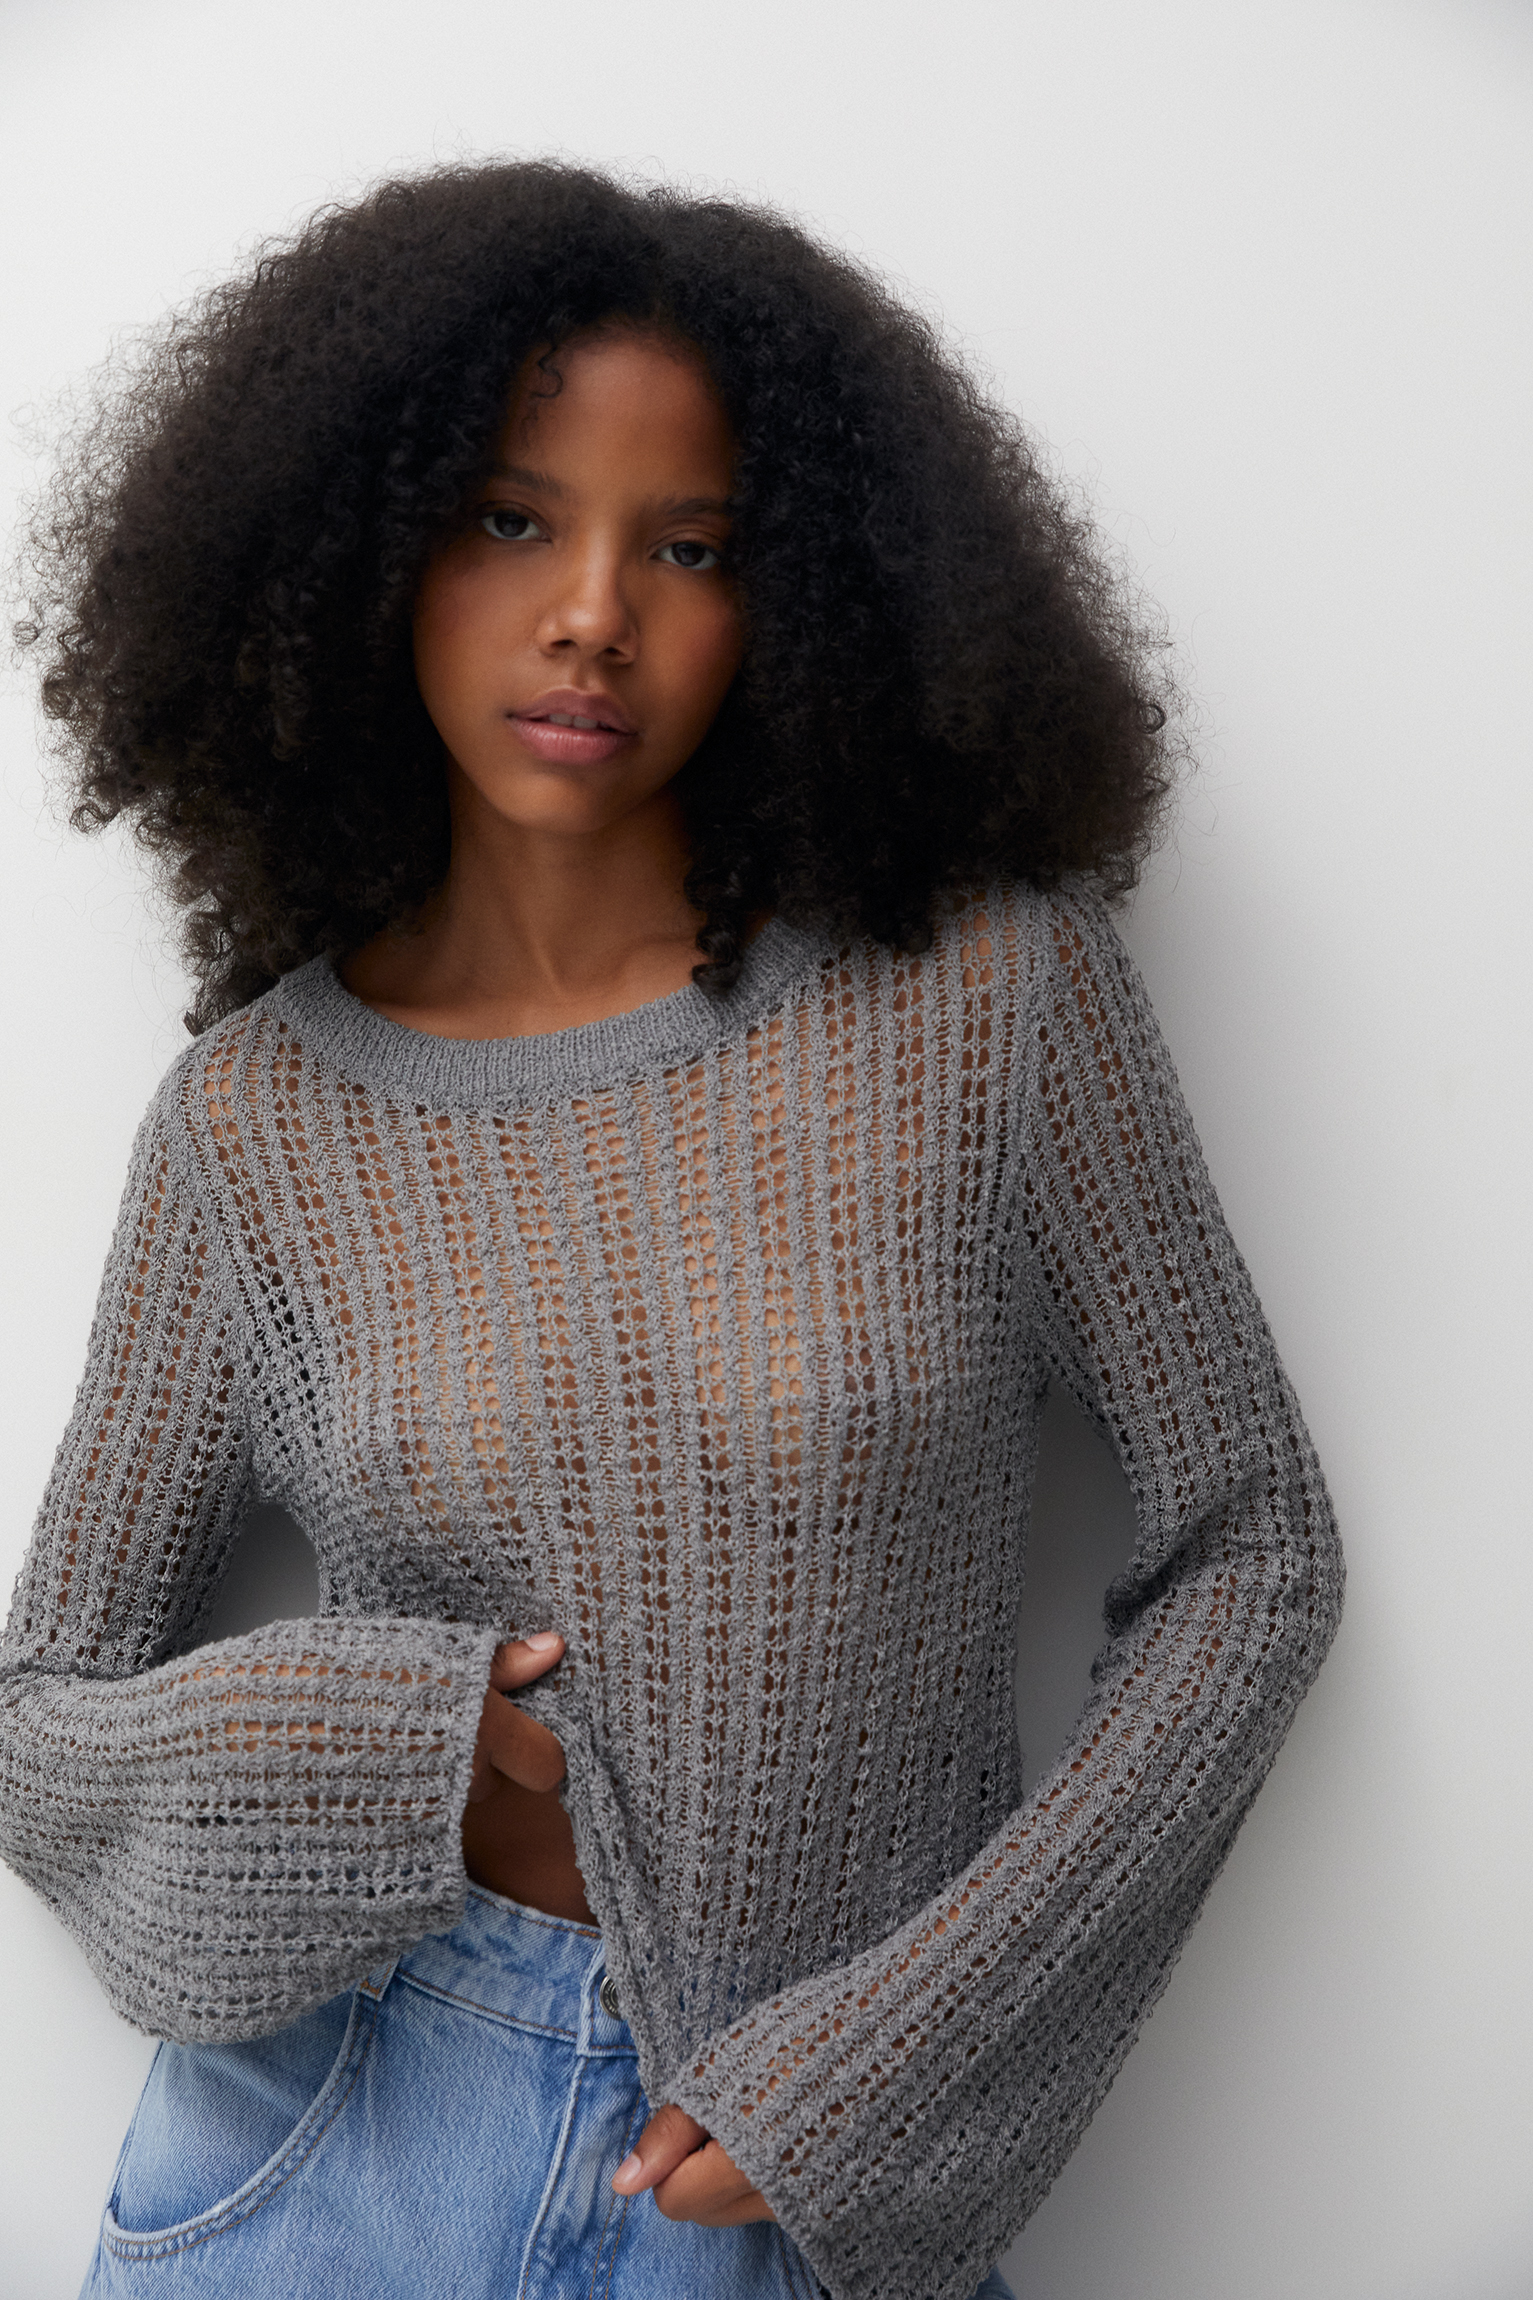 Openwork knit sweater with flared sleeves